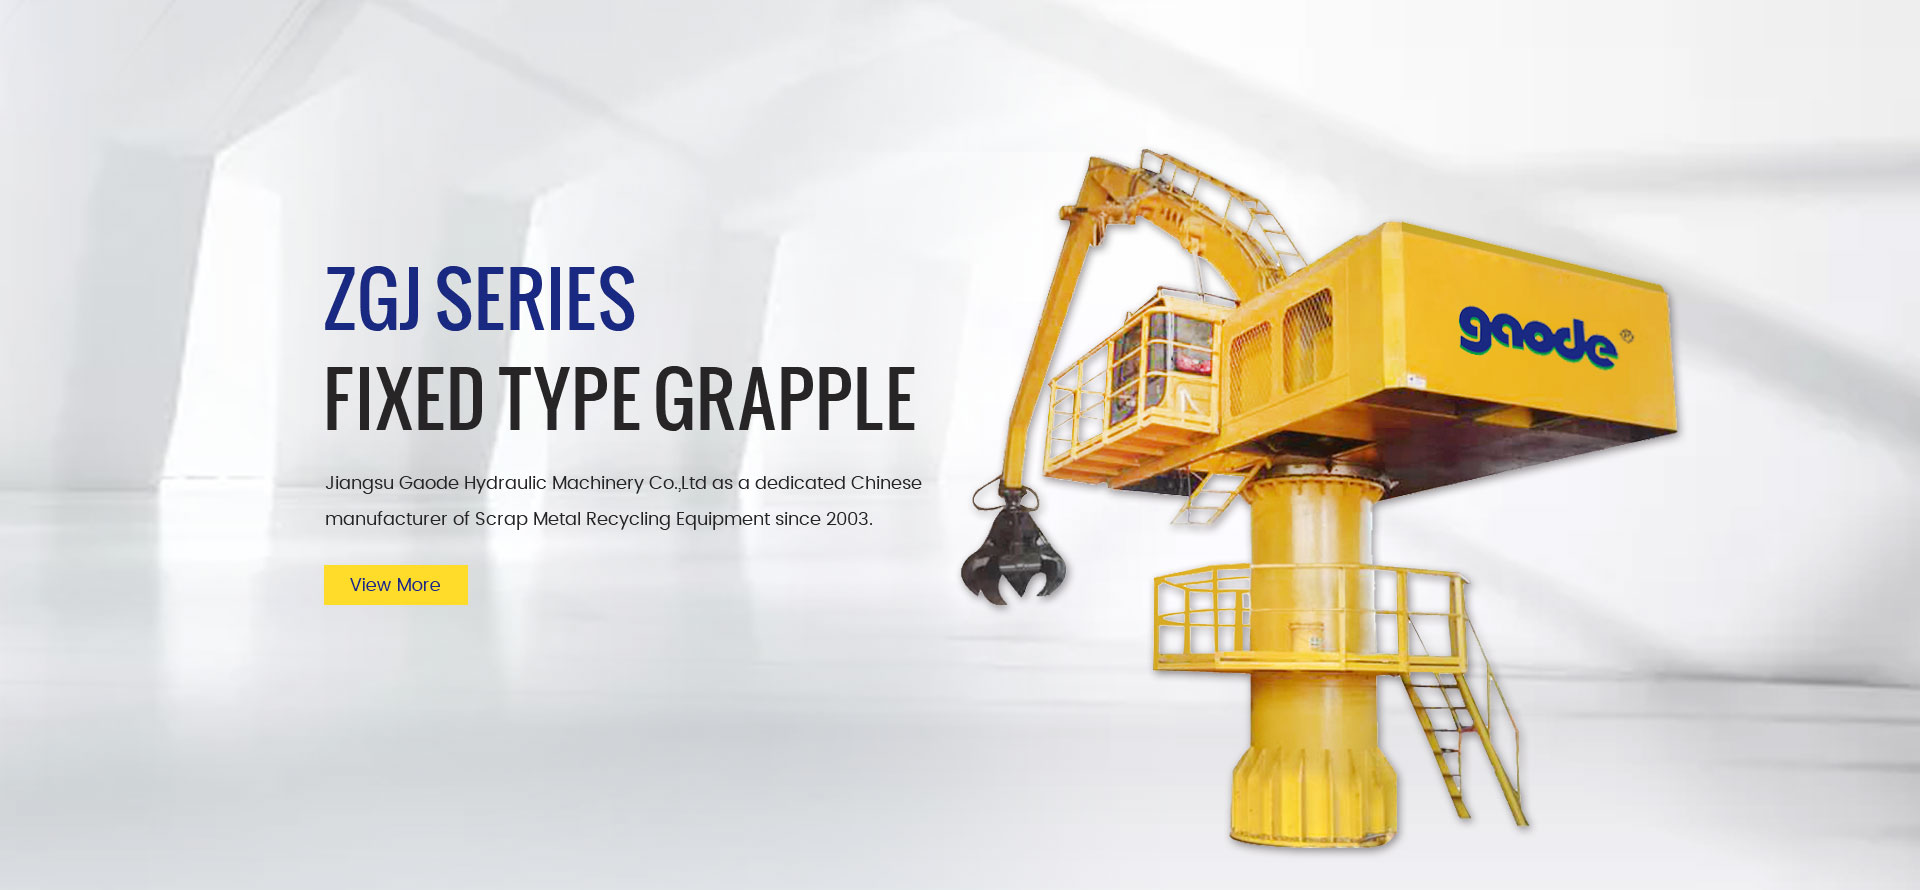 Fixed Type Grapple